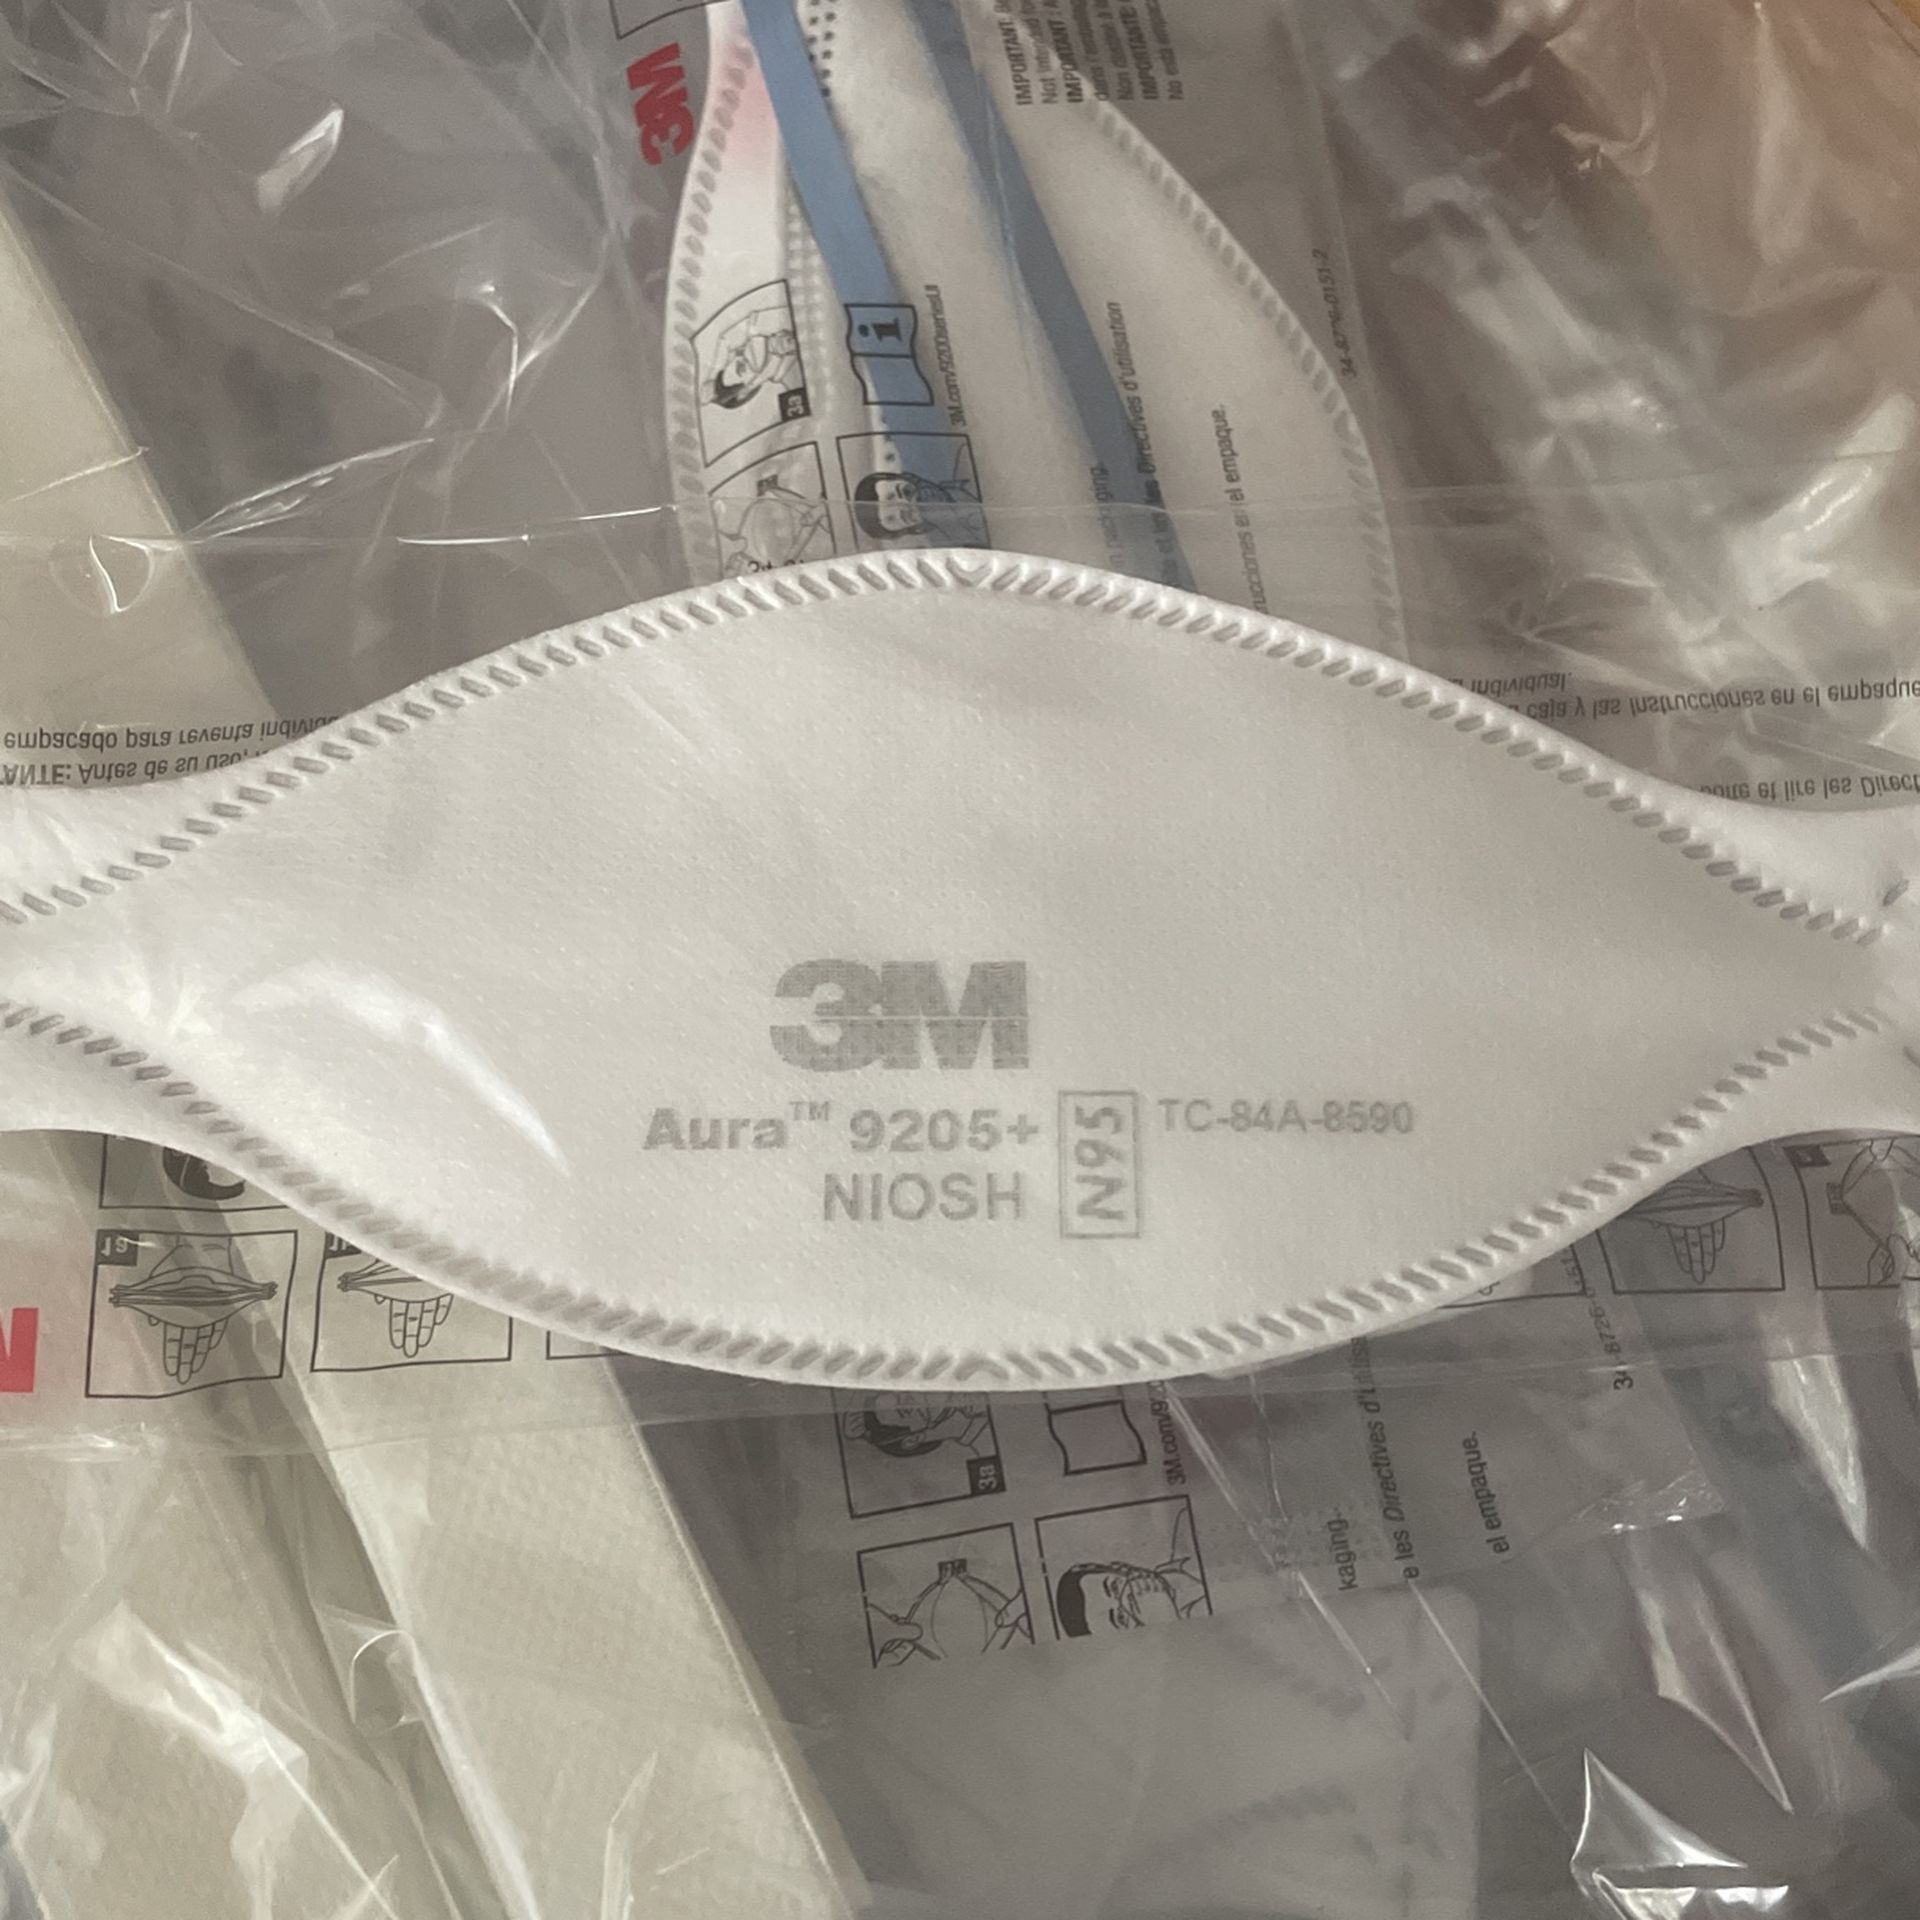 3M Face Shields And Mask